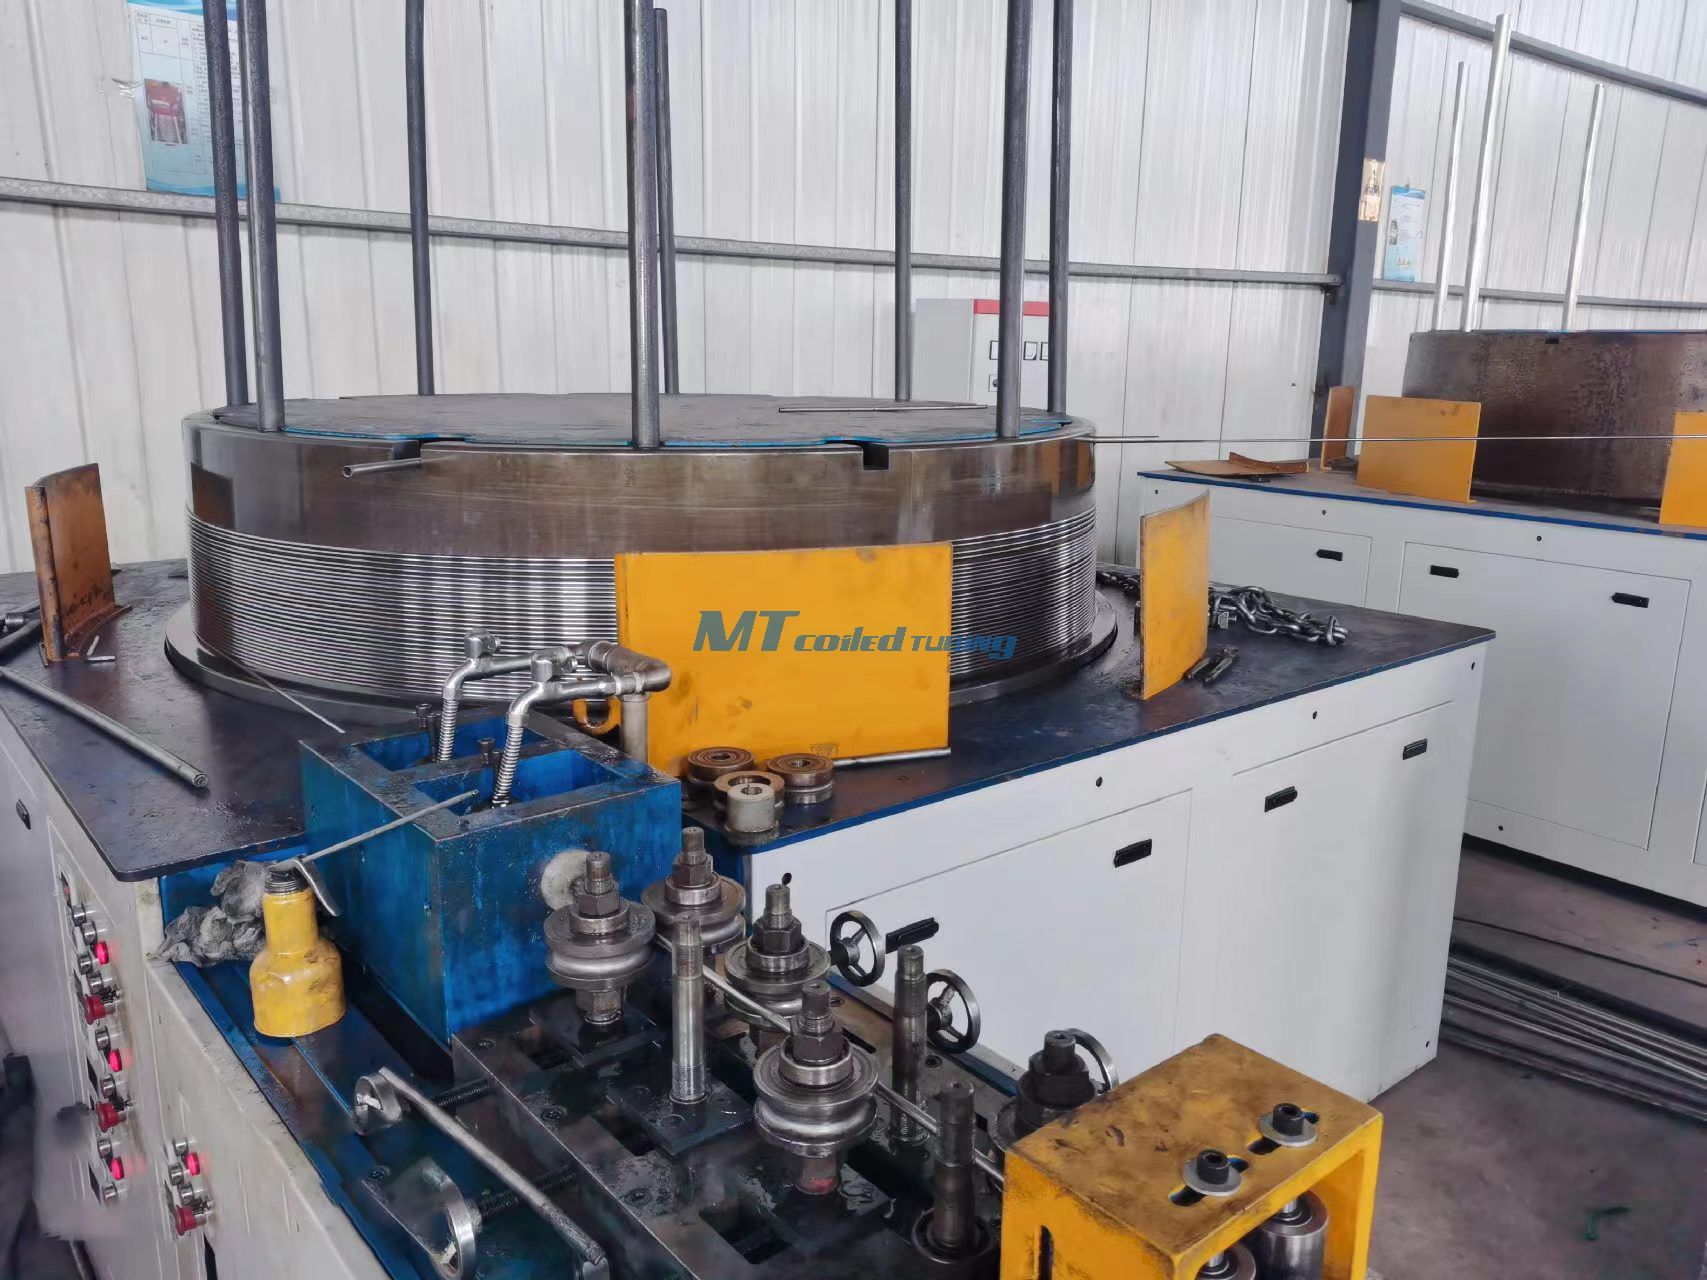 mtsco coiled tubing manufacture (23)